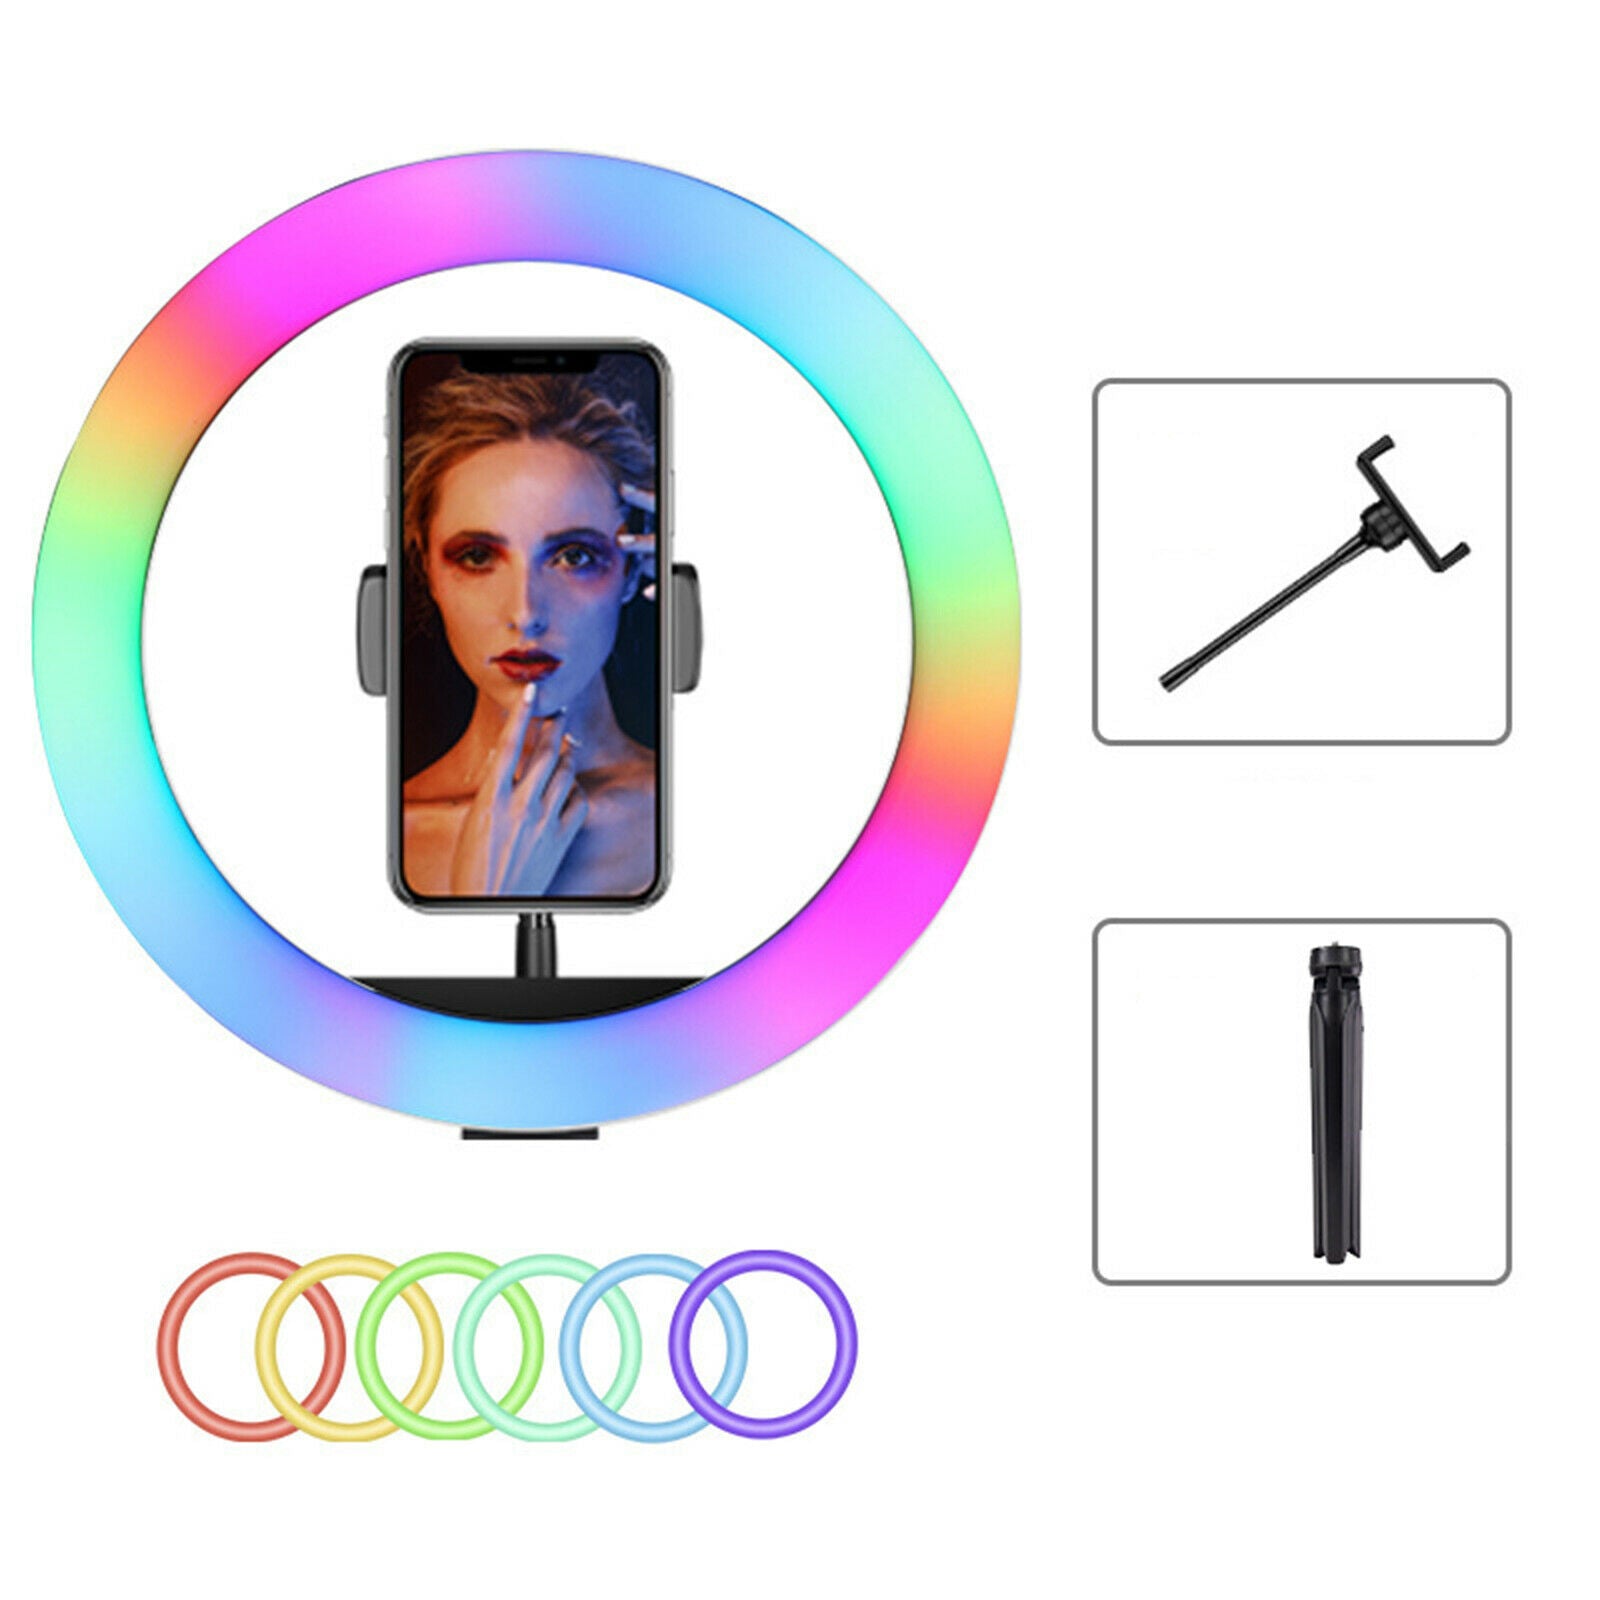 10inch LED Ring Dimmable Light with Tripod Stand Tabletop Makeup Ringlight